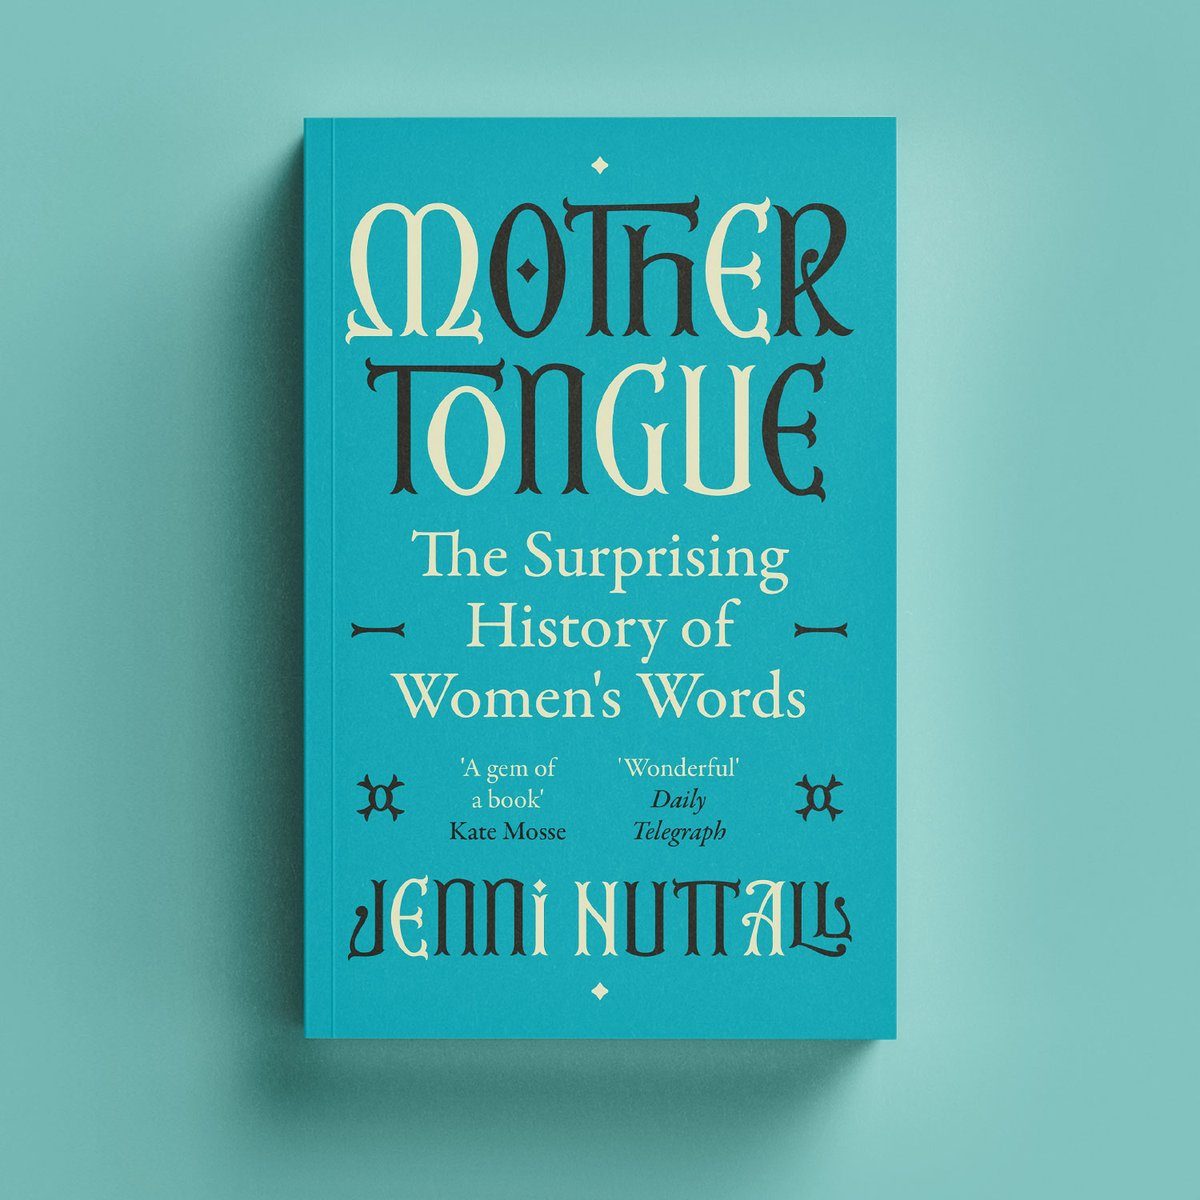 Spinster. Cougar. Carer. Matron. Wife. MOTHER TONGUE is rich, provocative and entertaining history of women's words - of the language we have, and haven't, had to share our lives. Out today in paperback from @ViragoBooks